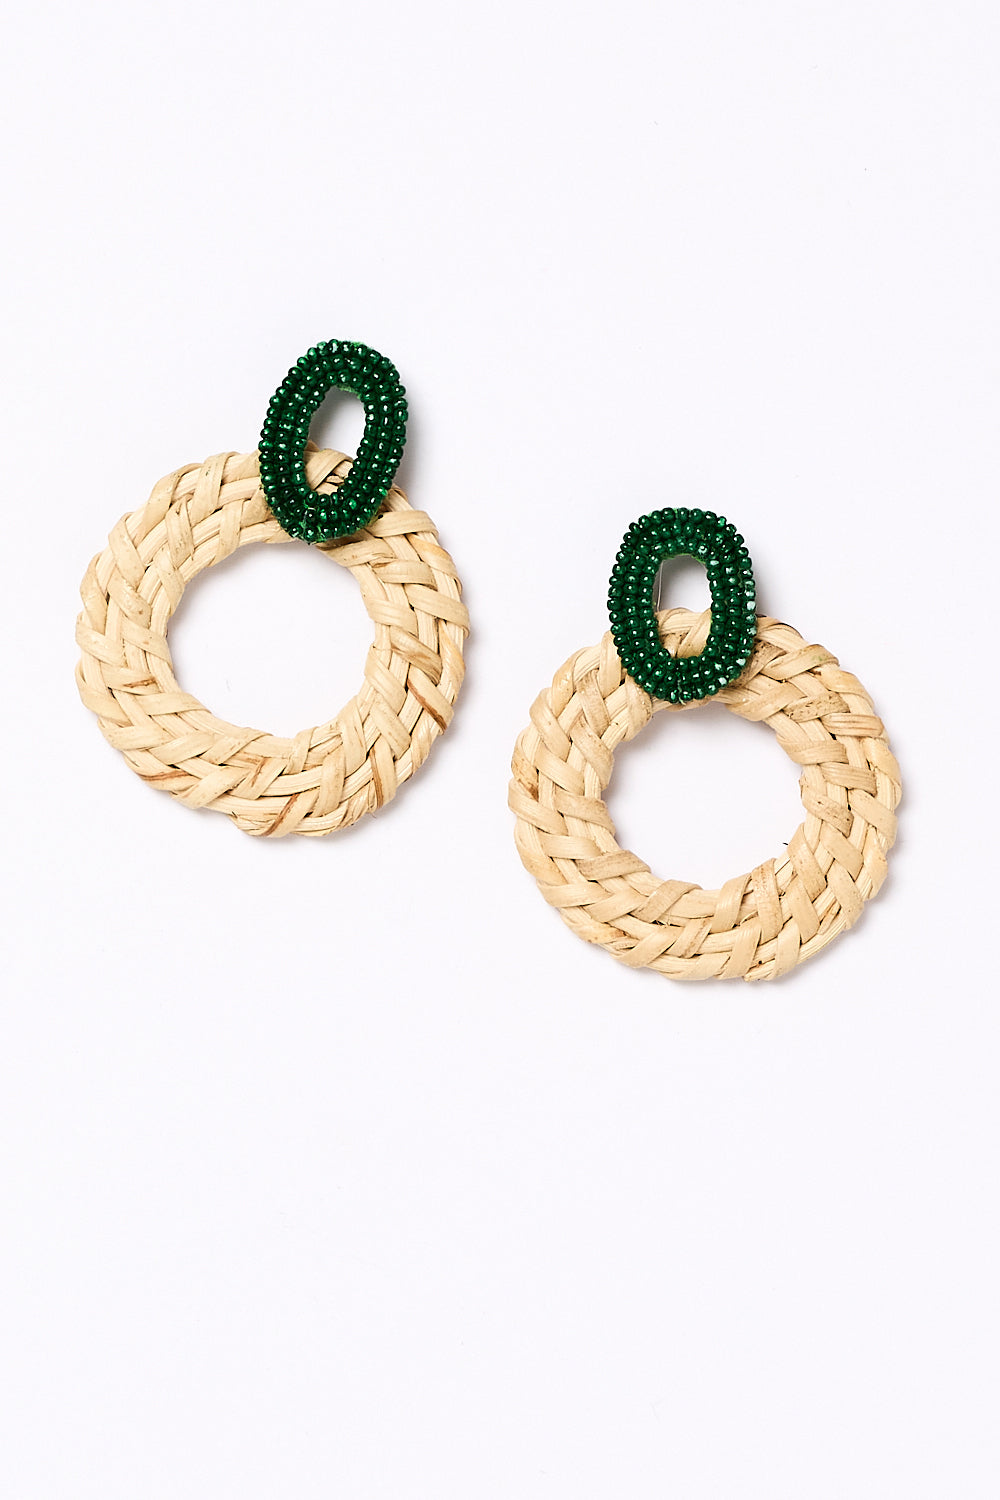 Beaded Circle Weave Earrings in Emerald and Natural